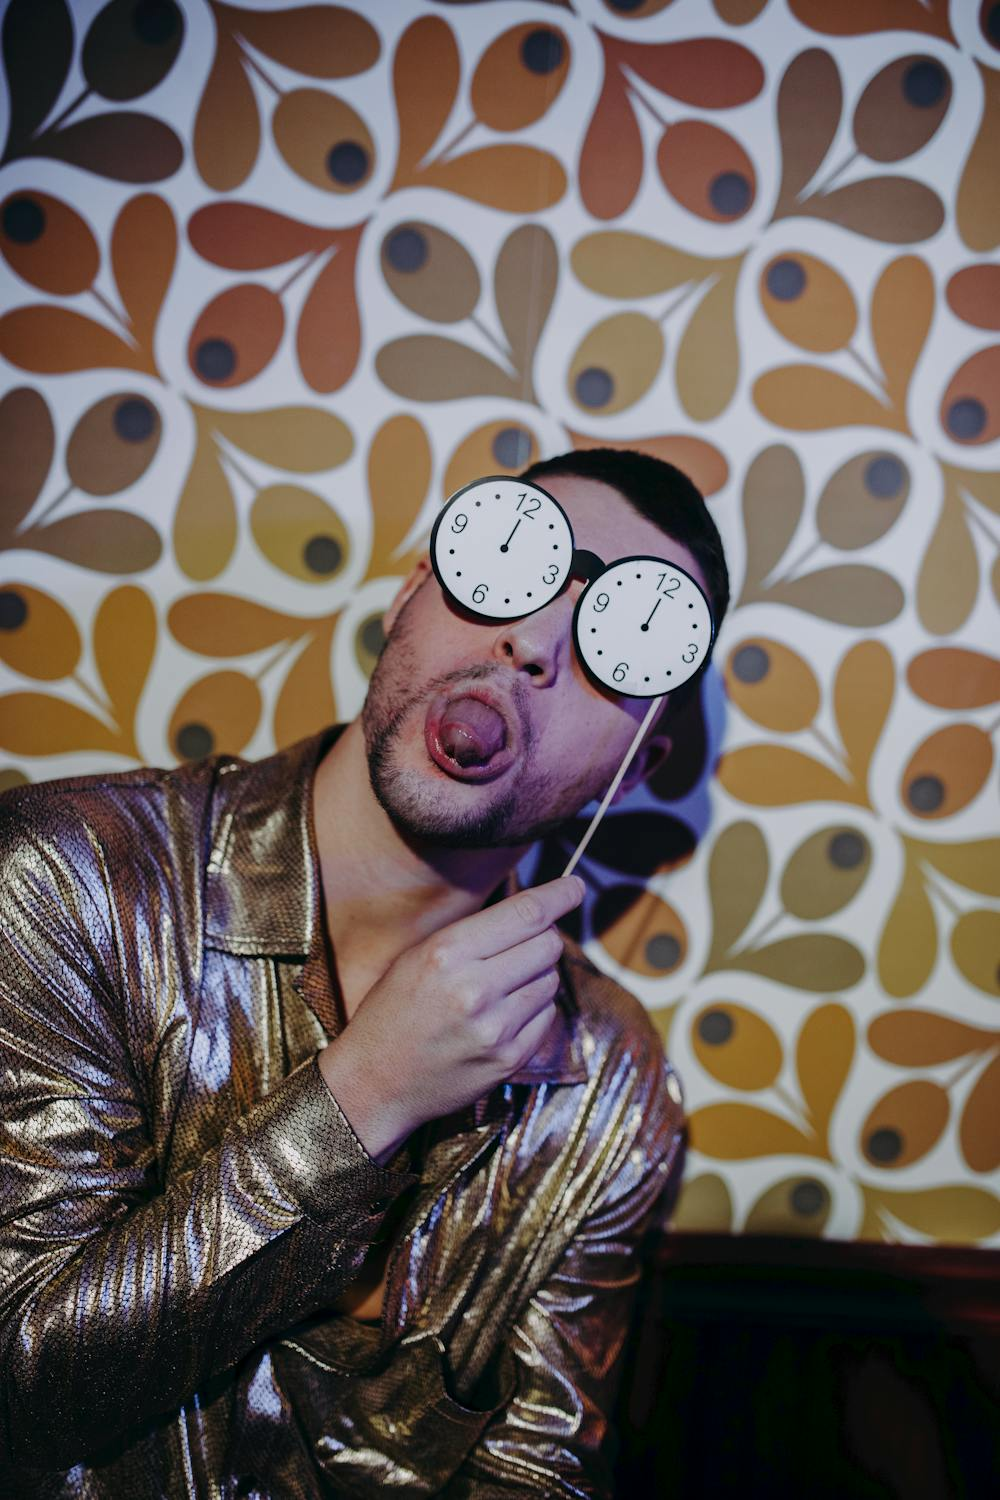 Man Sticking His Tongue Out While Holding Clock Sunglasses